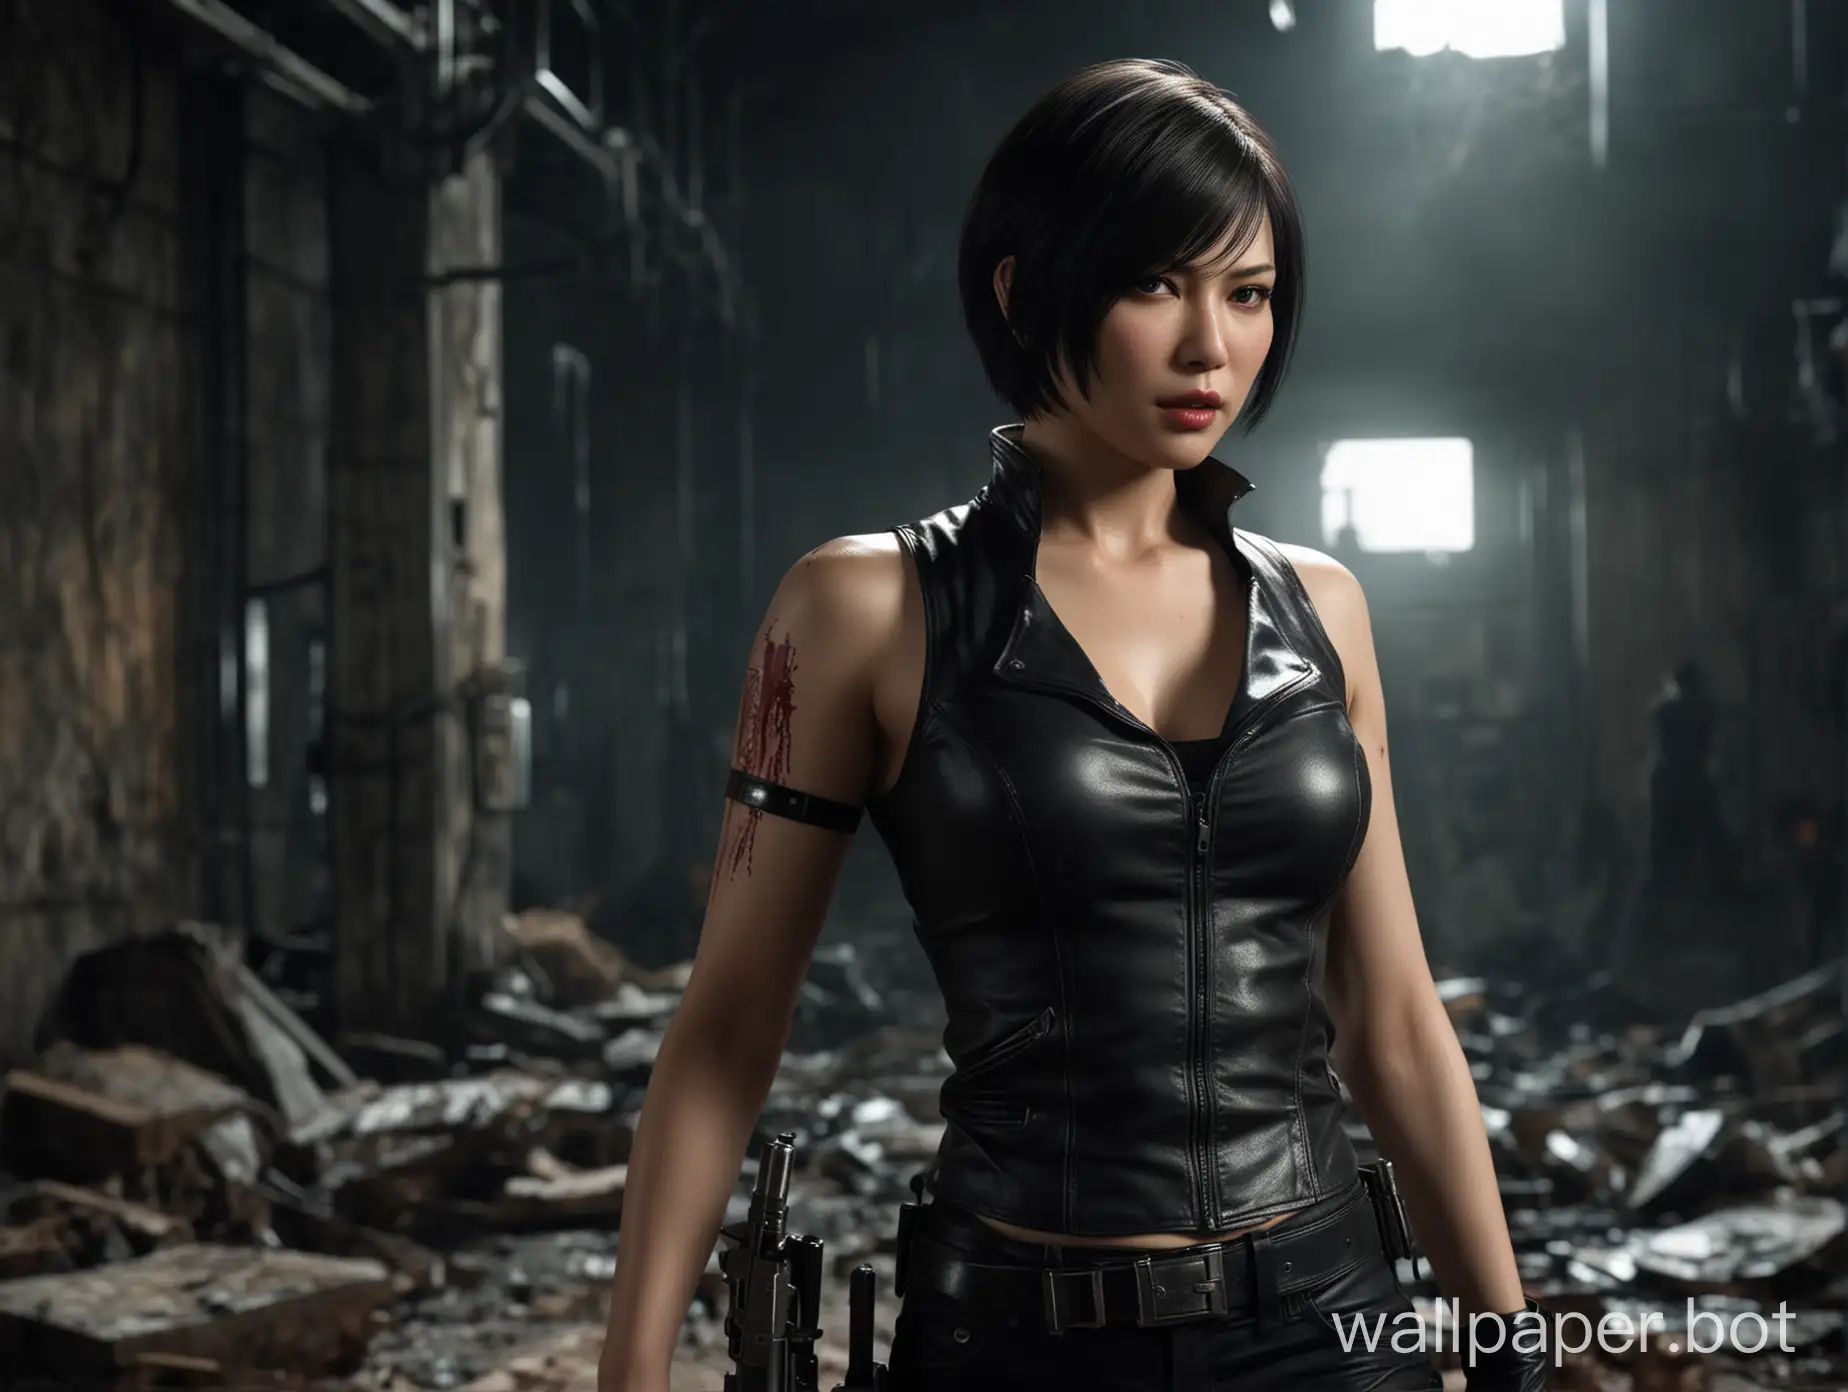 Ada-Wong-Short-Hair-Leather-Top-Revolver-Ruined-Laboratory